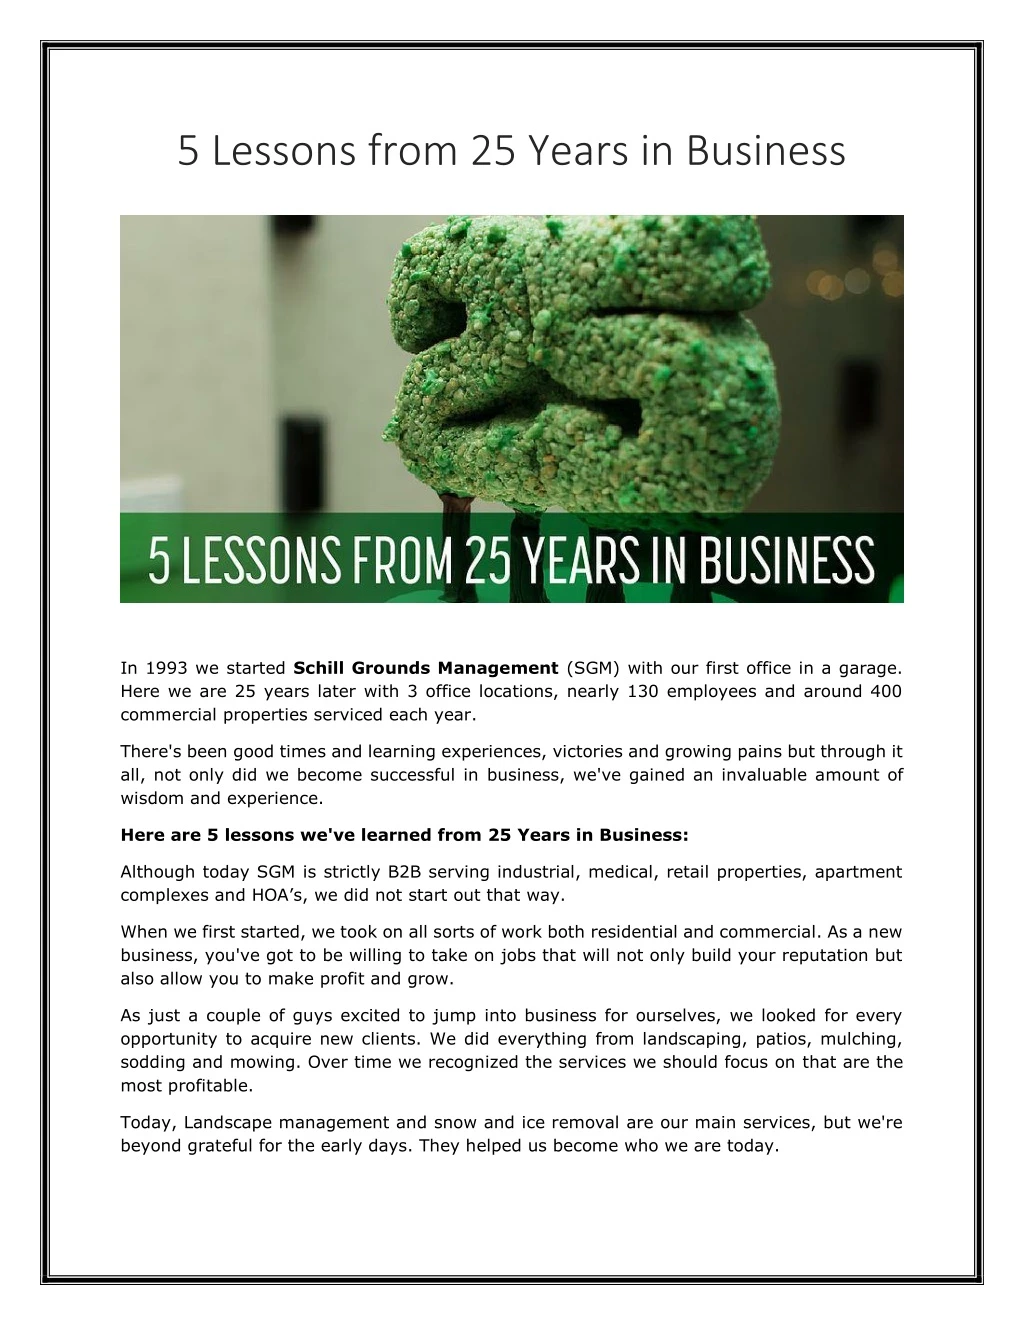 5 lessons from 25 years in business